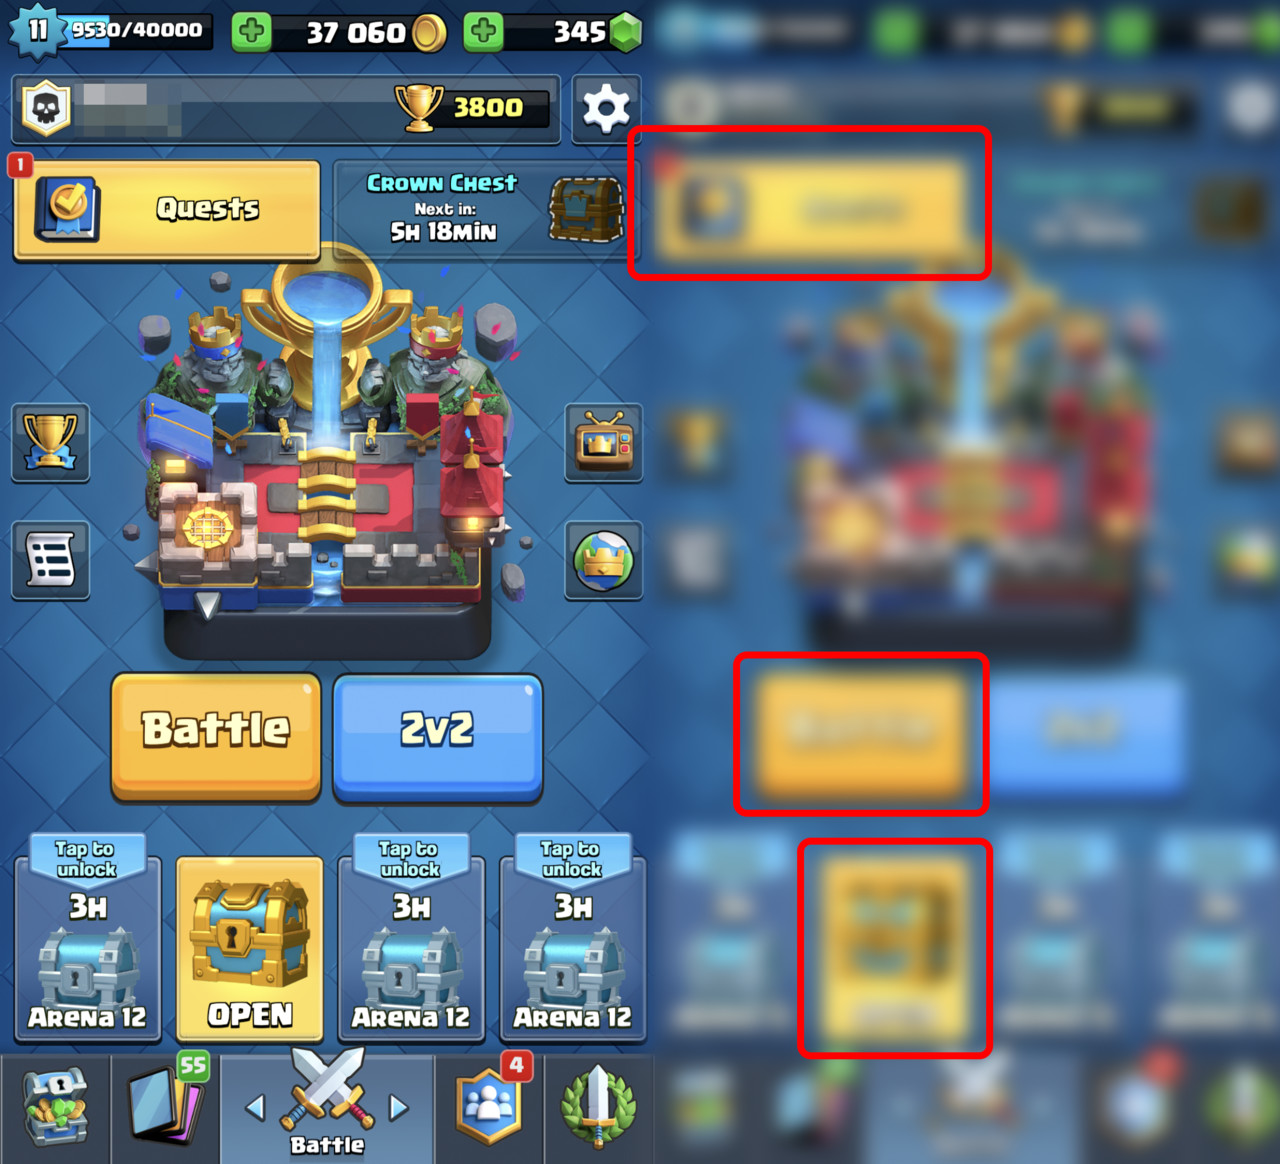 UX in Clash Royale